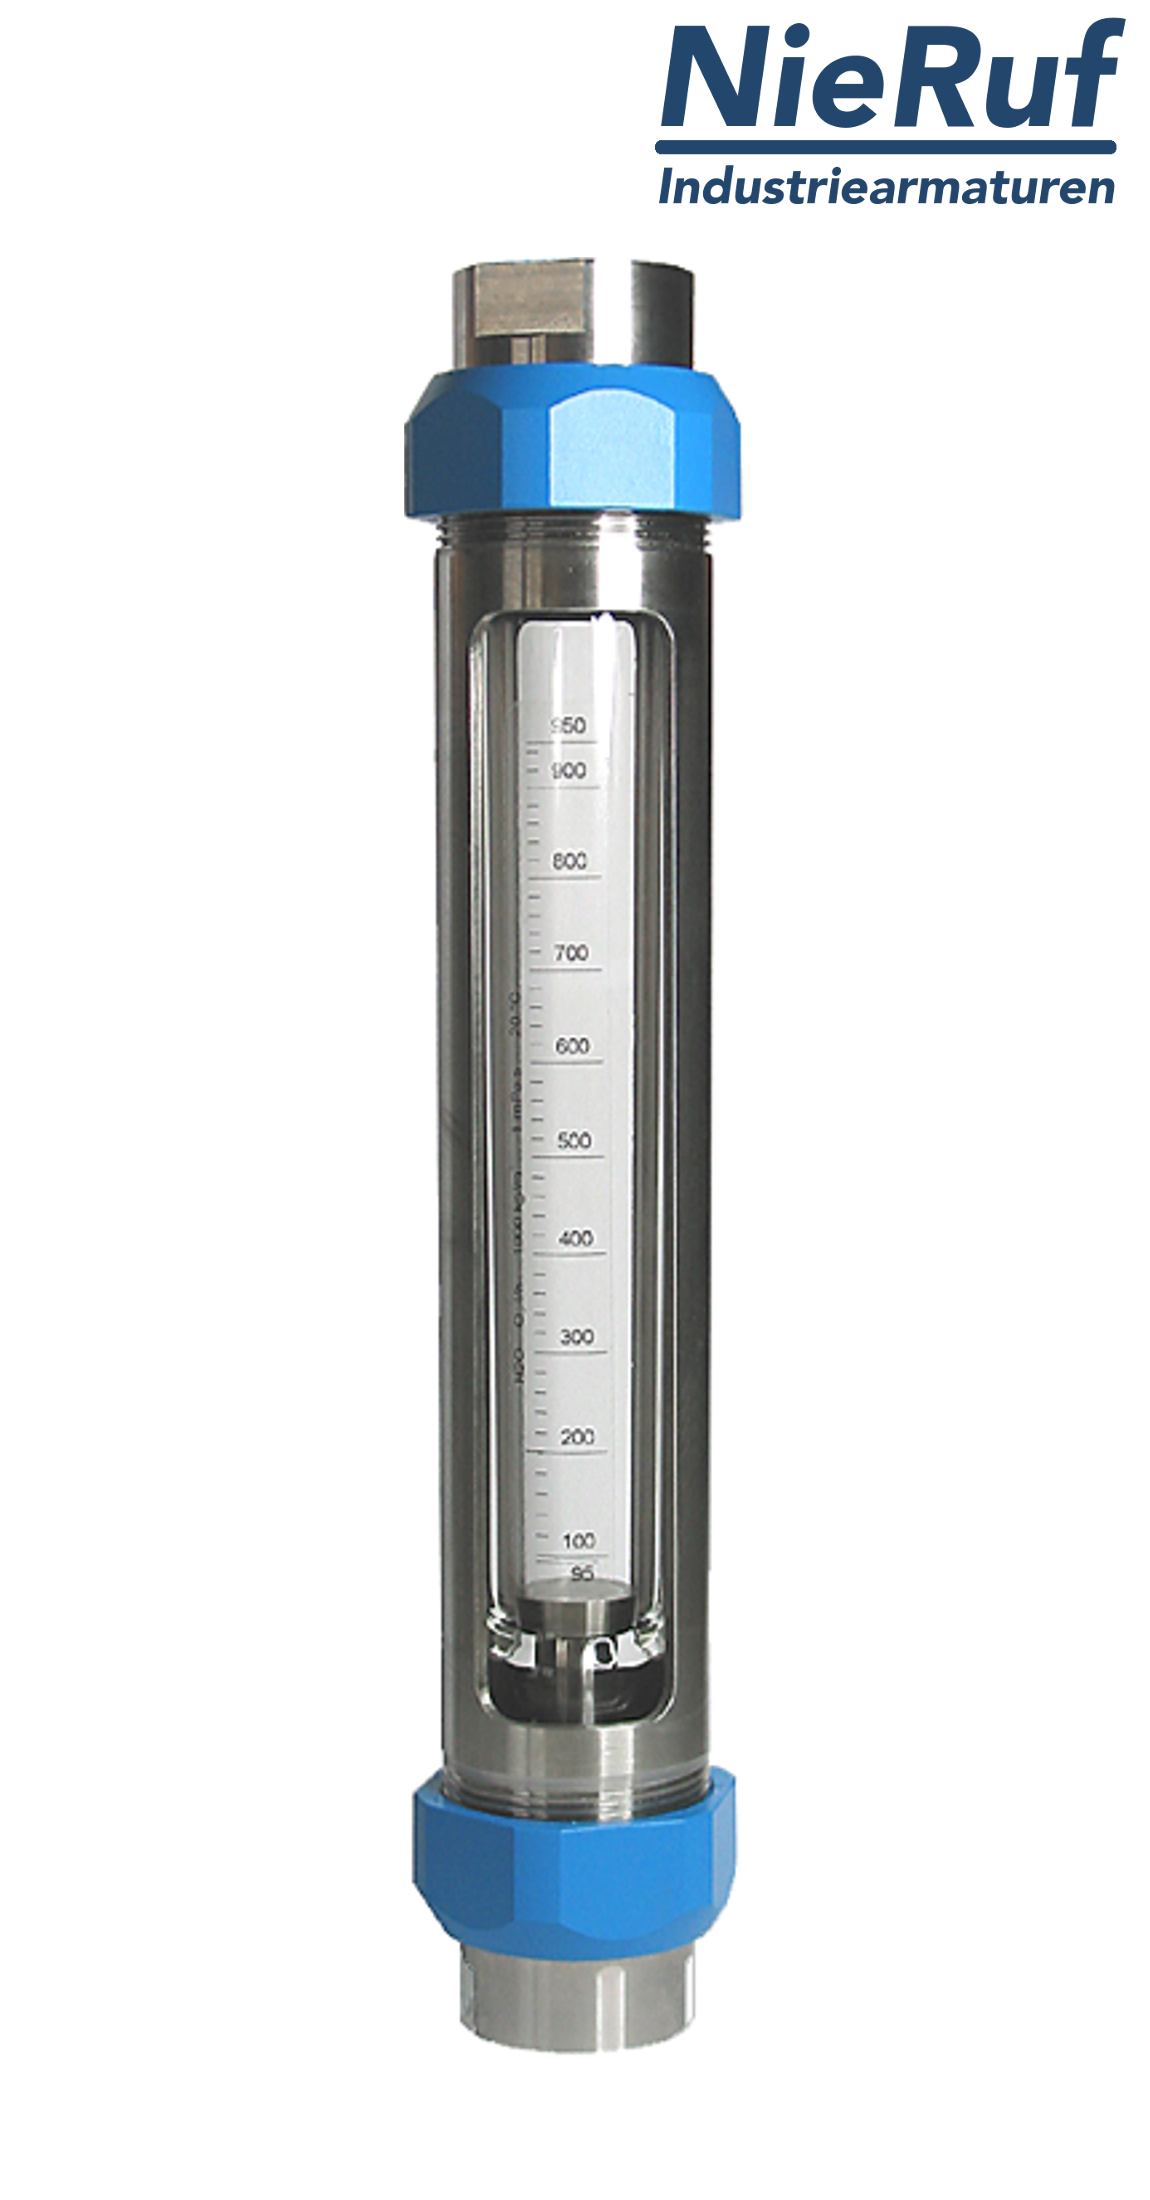 Variable area flowmeter stainless steel + borosilicate 2" inch 6000.0 - 20000 l/h water EPDM